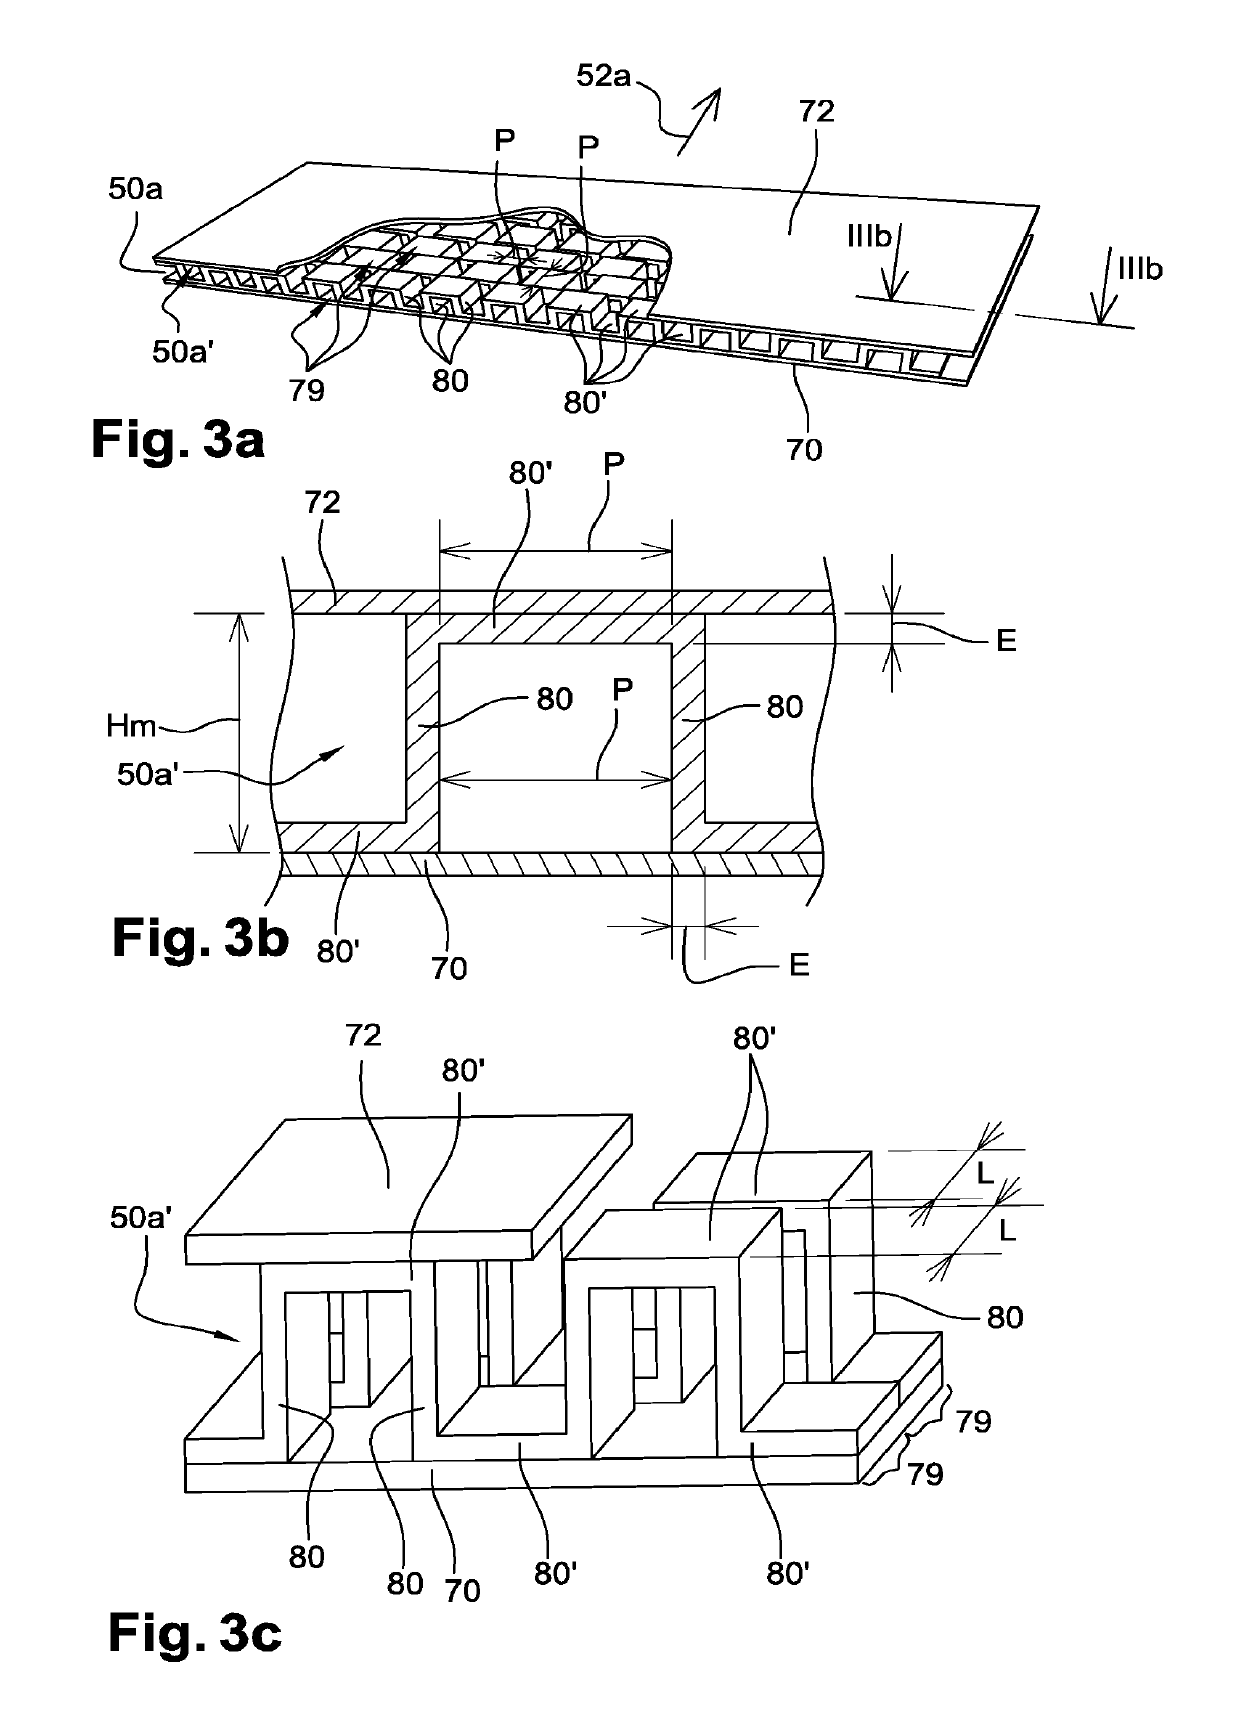 Output director vane for an aircraft turbine engine, with an improved lubricant cooling function using a heat conduction matrix housed in an inner duct of the vane